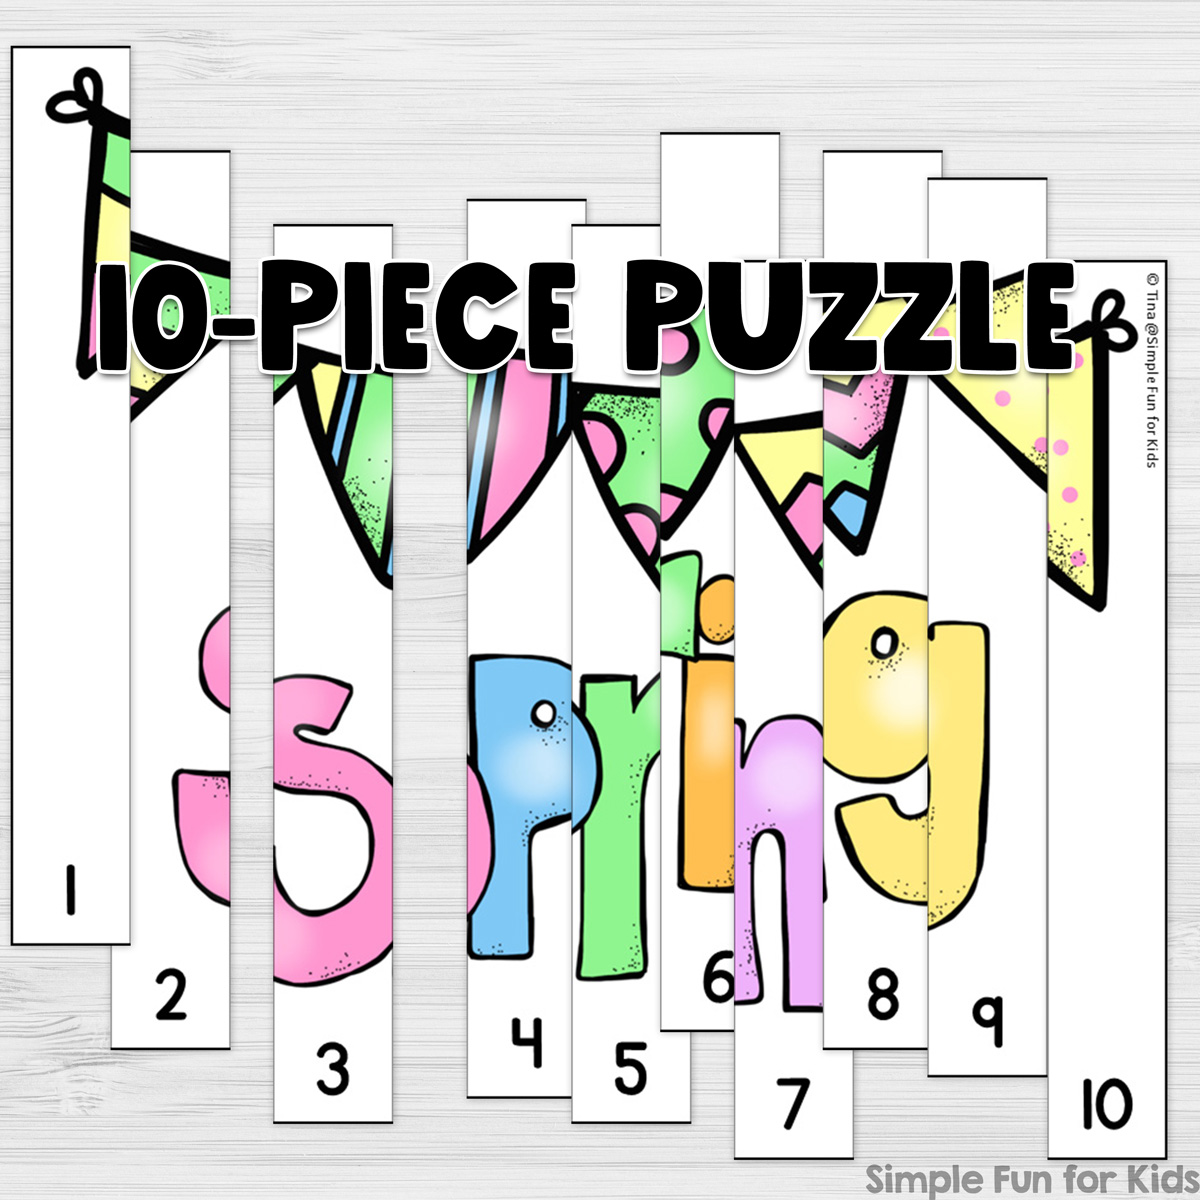 Ten-piece spring line-up puzzle on top of a white desktop with the words 10-piece puzzle in black on top.